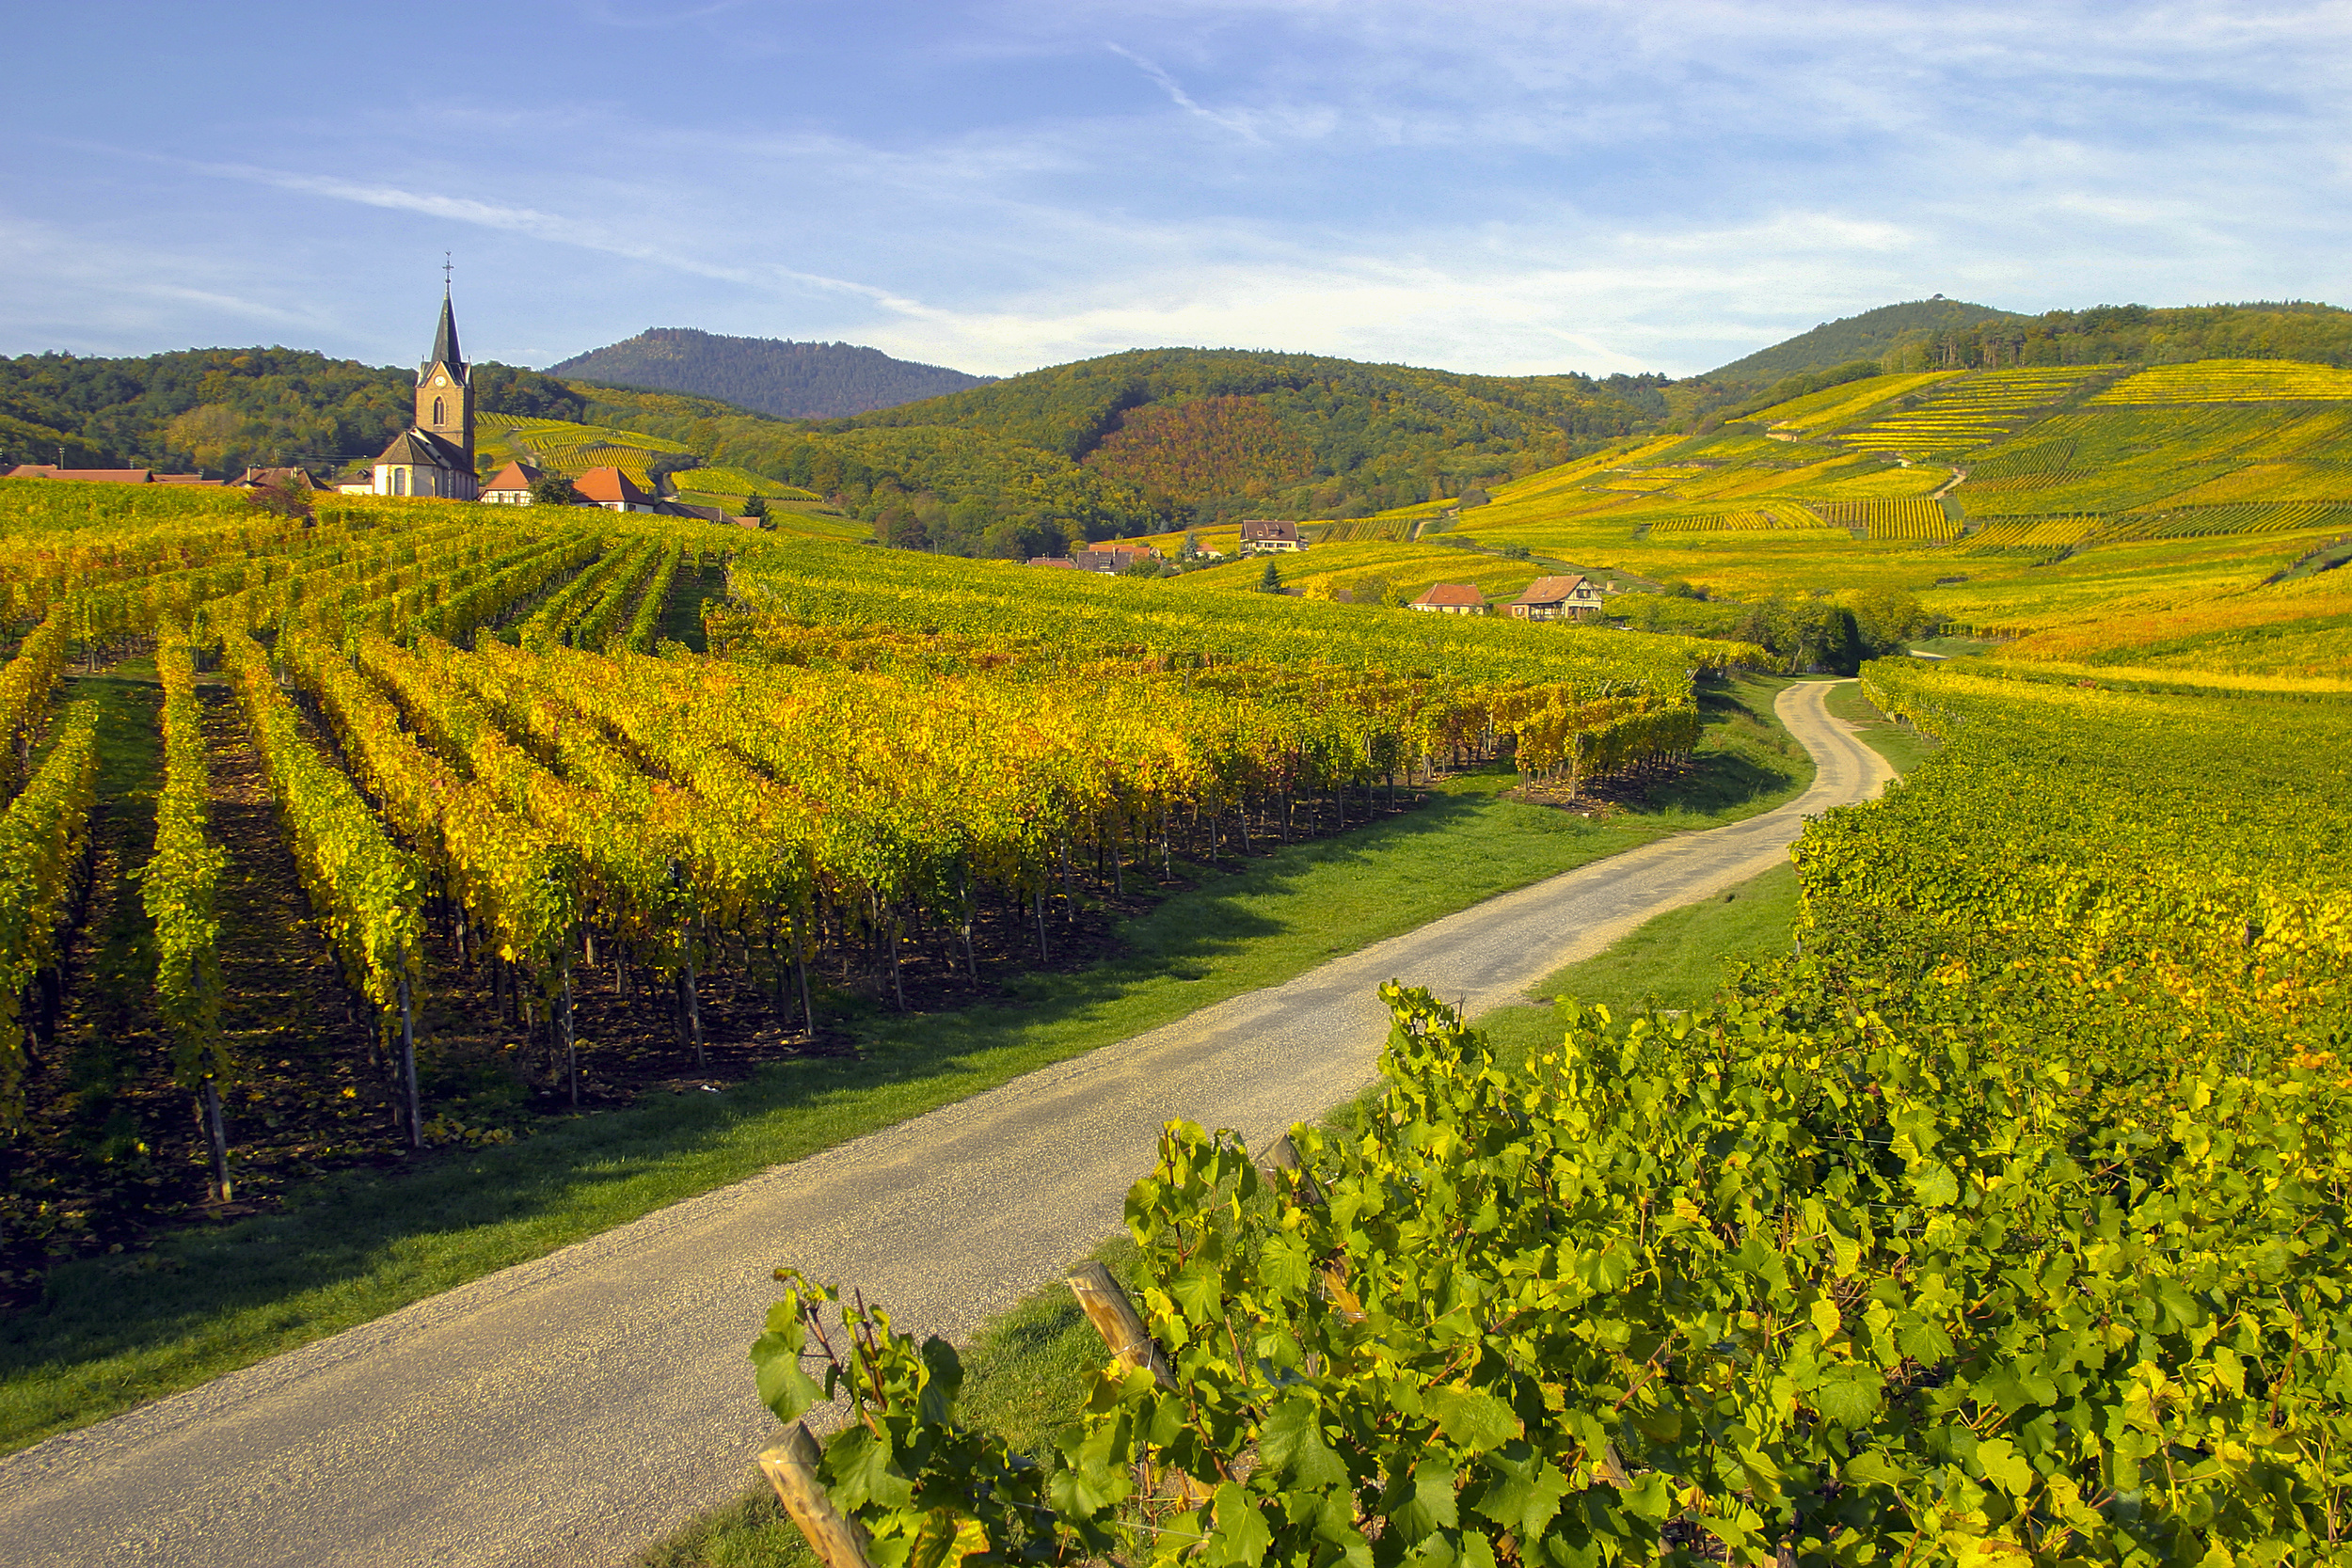 <p>One of the original wine routes in France, Alsace is ideal throughout the year. You’ll stop at numerous wineries between Mulhouse and Strasbourg. Additionally, many other fairytale villages, such as Colmar and Riquewihr, are included.</p><p><a href='https://www.msn.com/en-us/community/channel/vid-cj9pqbr0vn9in2b6ddcd8sfgpfq6x6utp44fssrv6mc2gtybw0us'>Follow us on MSN to see more of our exclusive lifestyle content.</a></p>